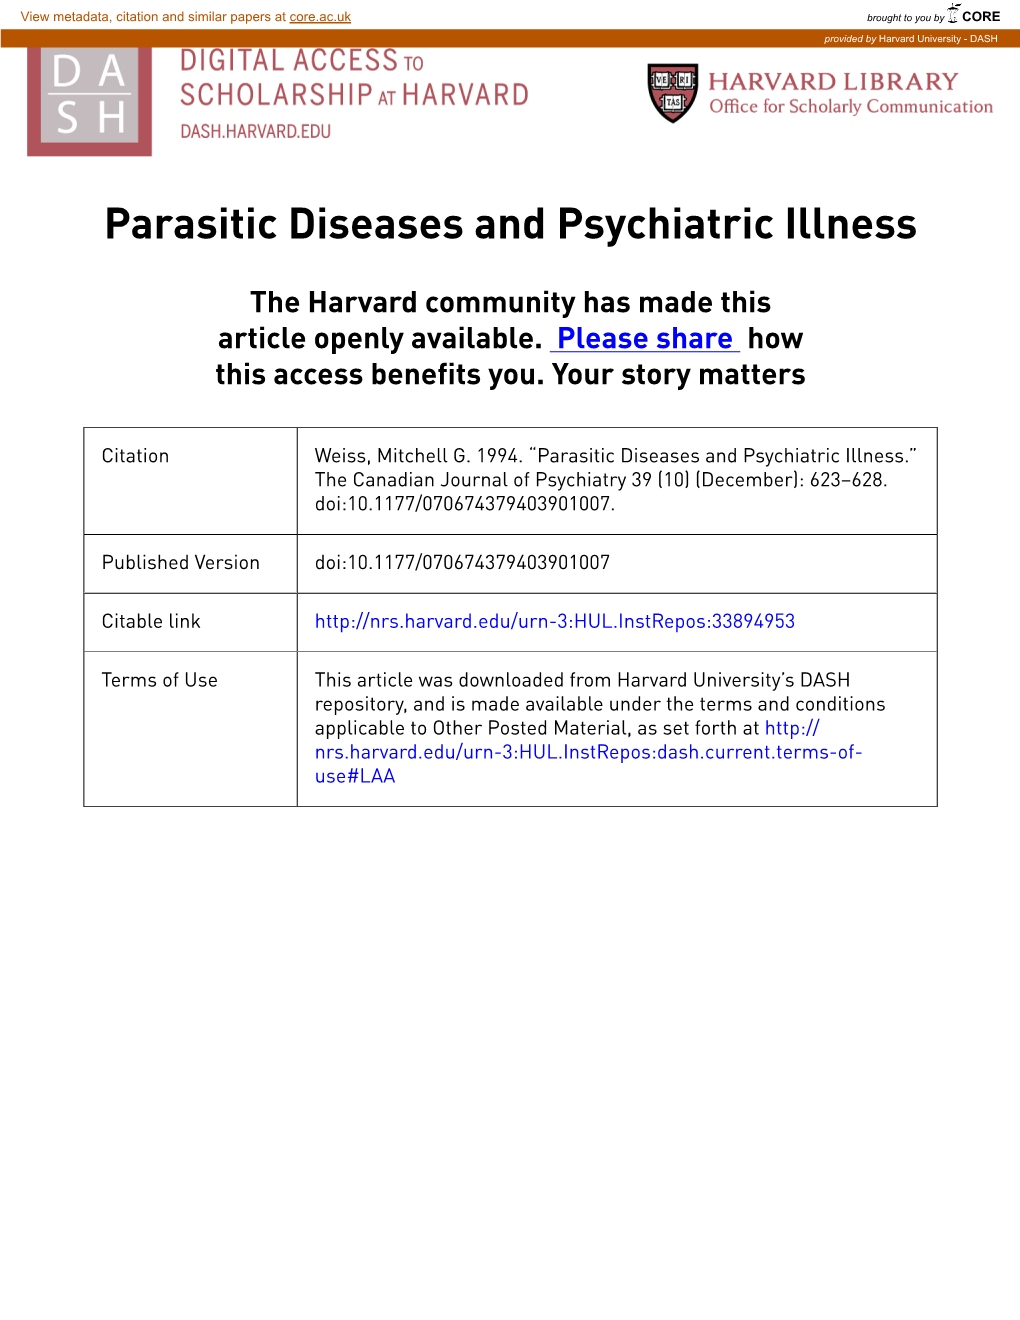 Parasitic Diseases and Psychiatric Illness